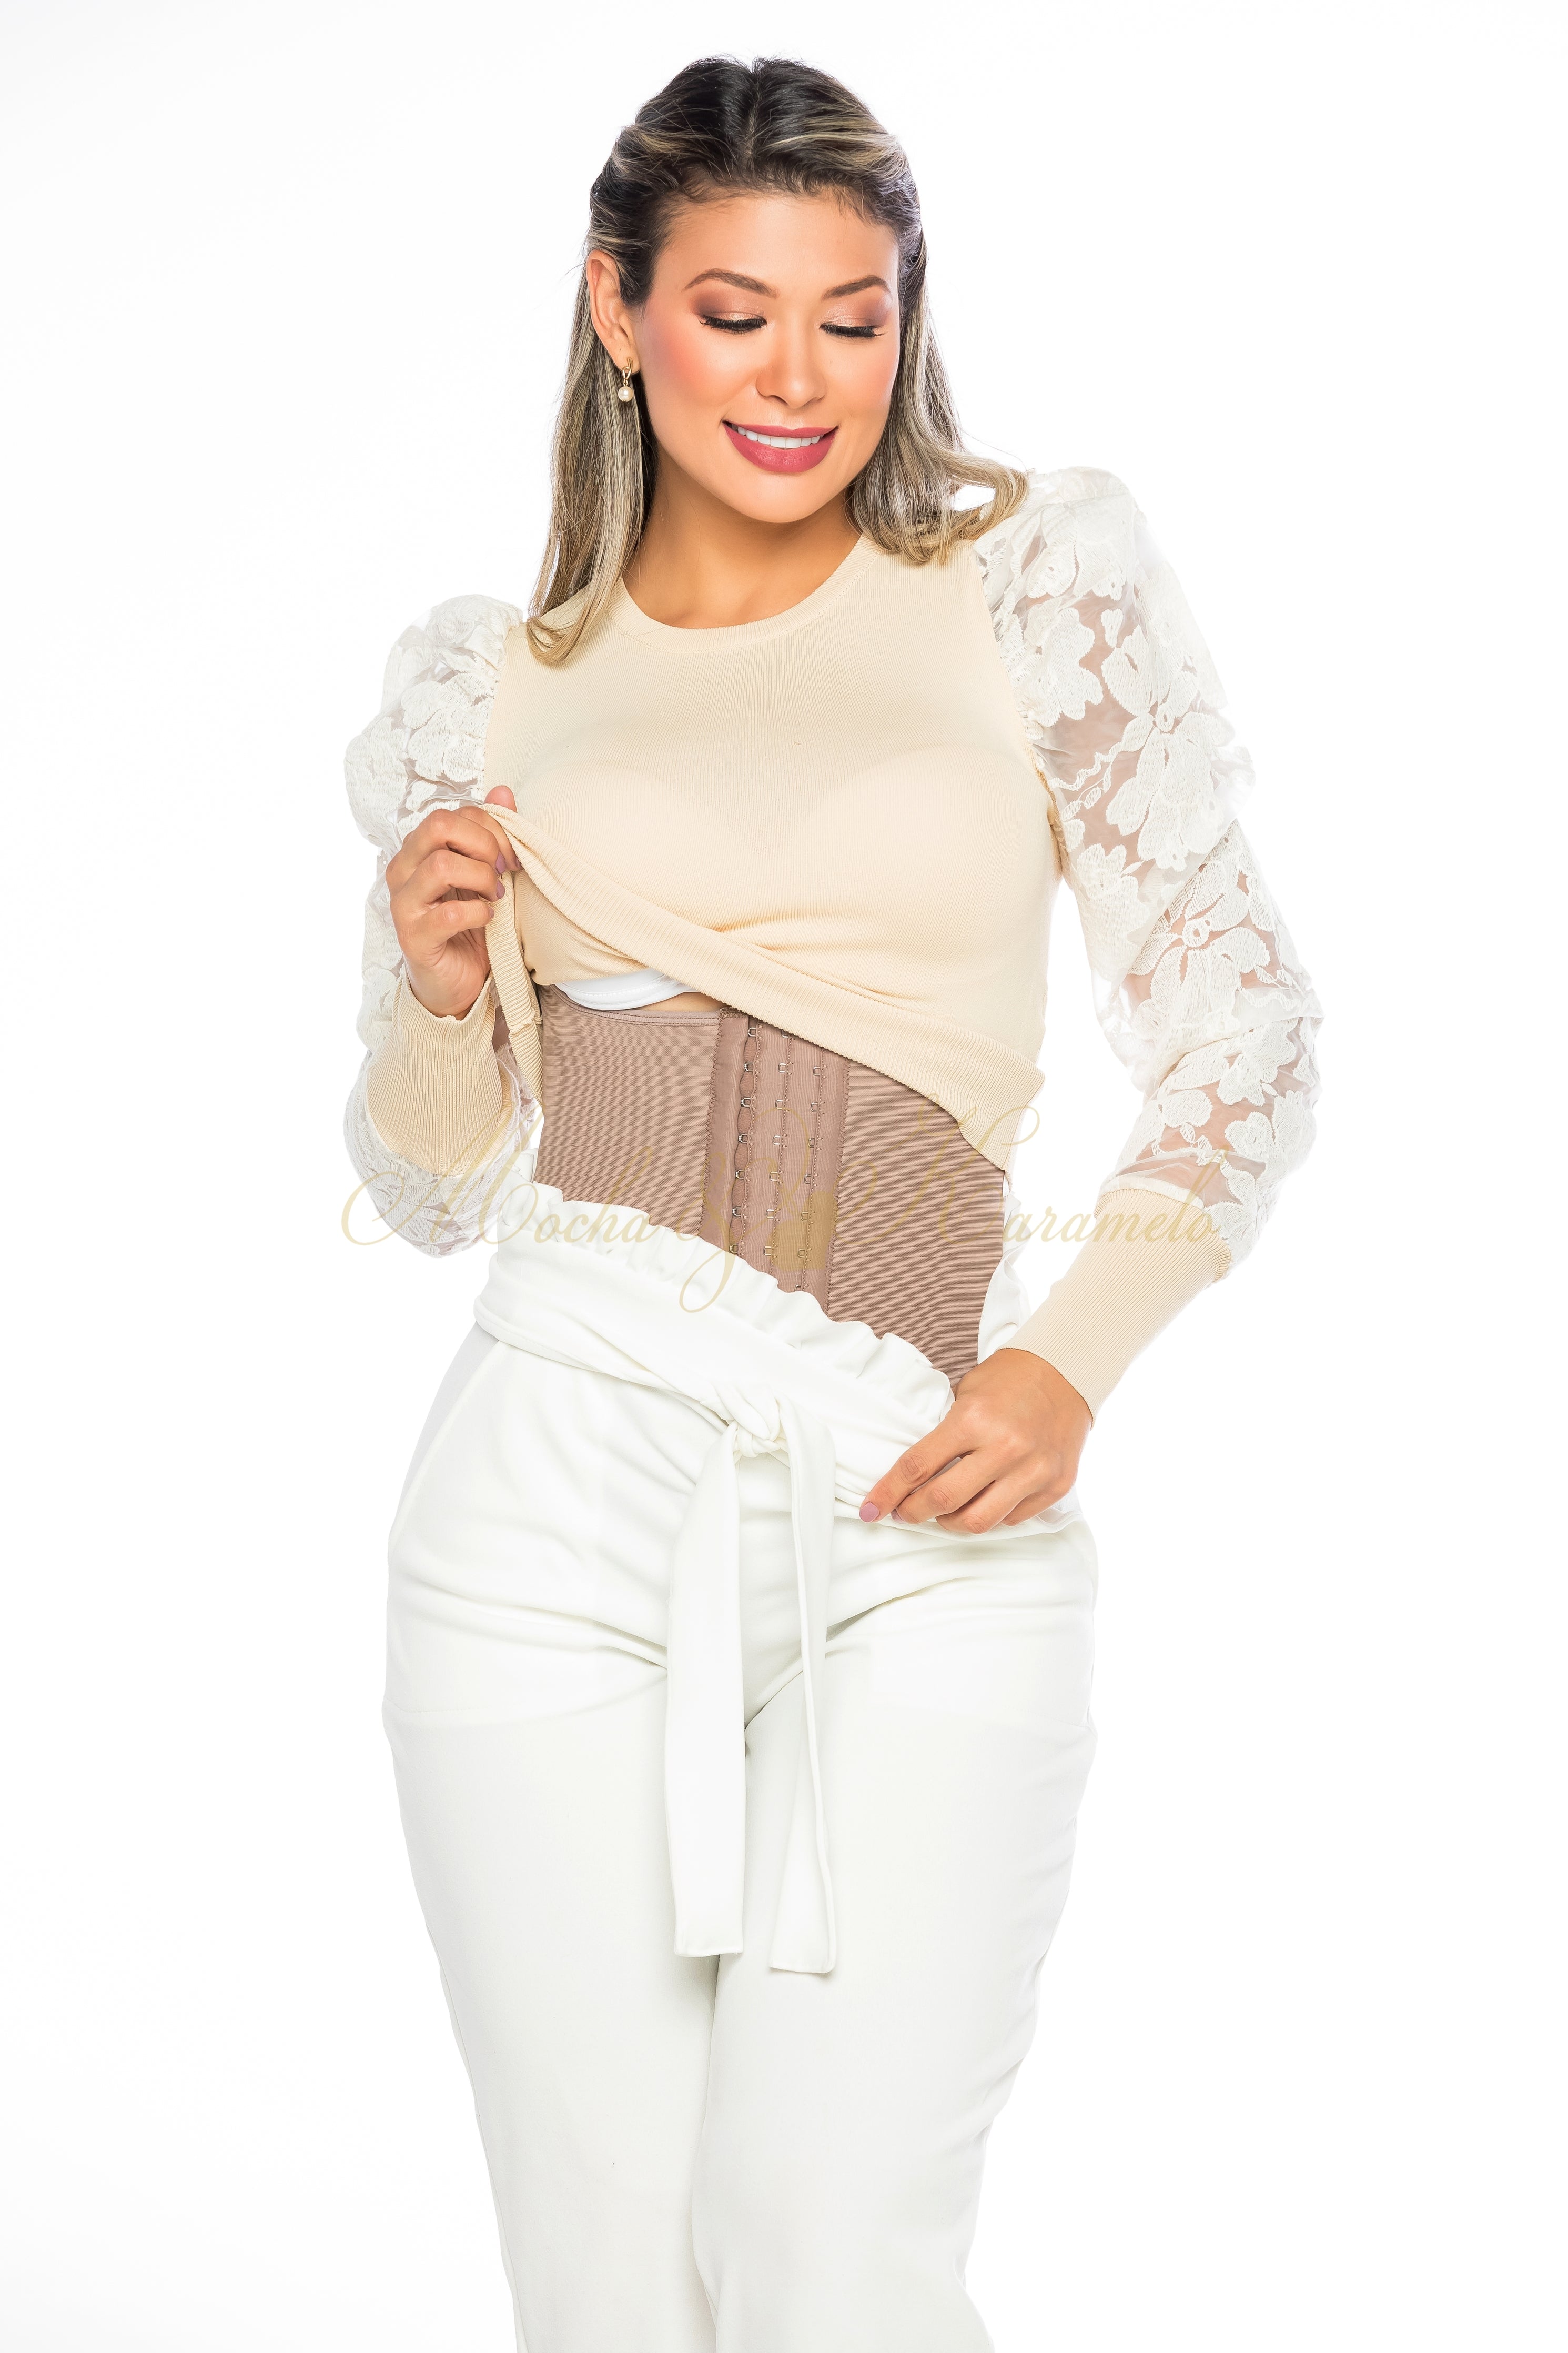 Personalized Fajas Colombianas with Built in Bra and Sleeves